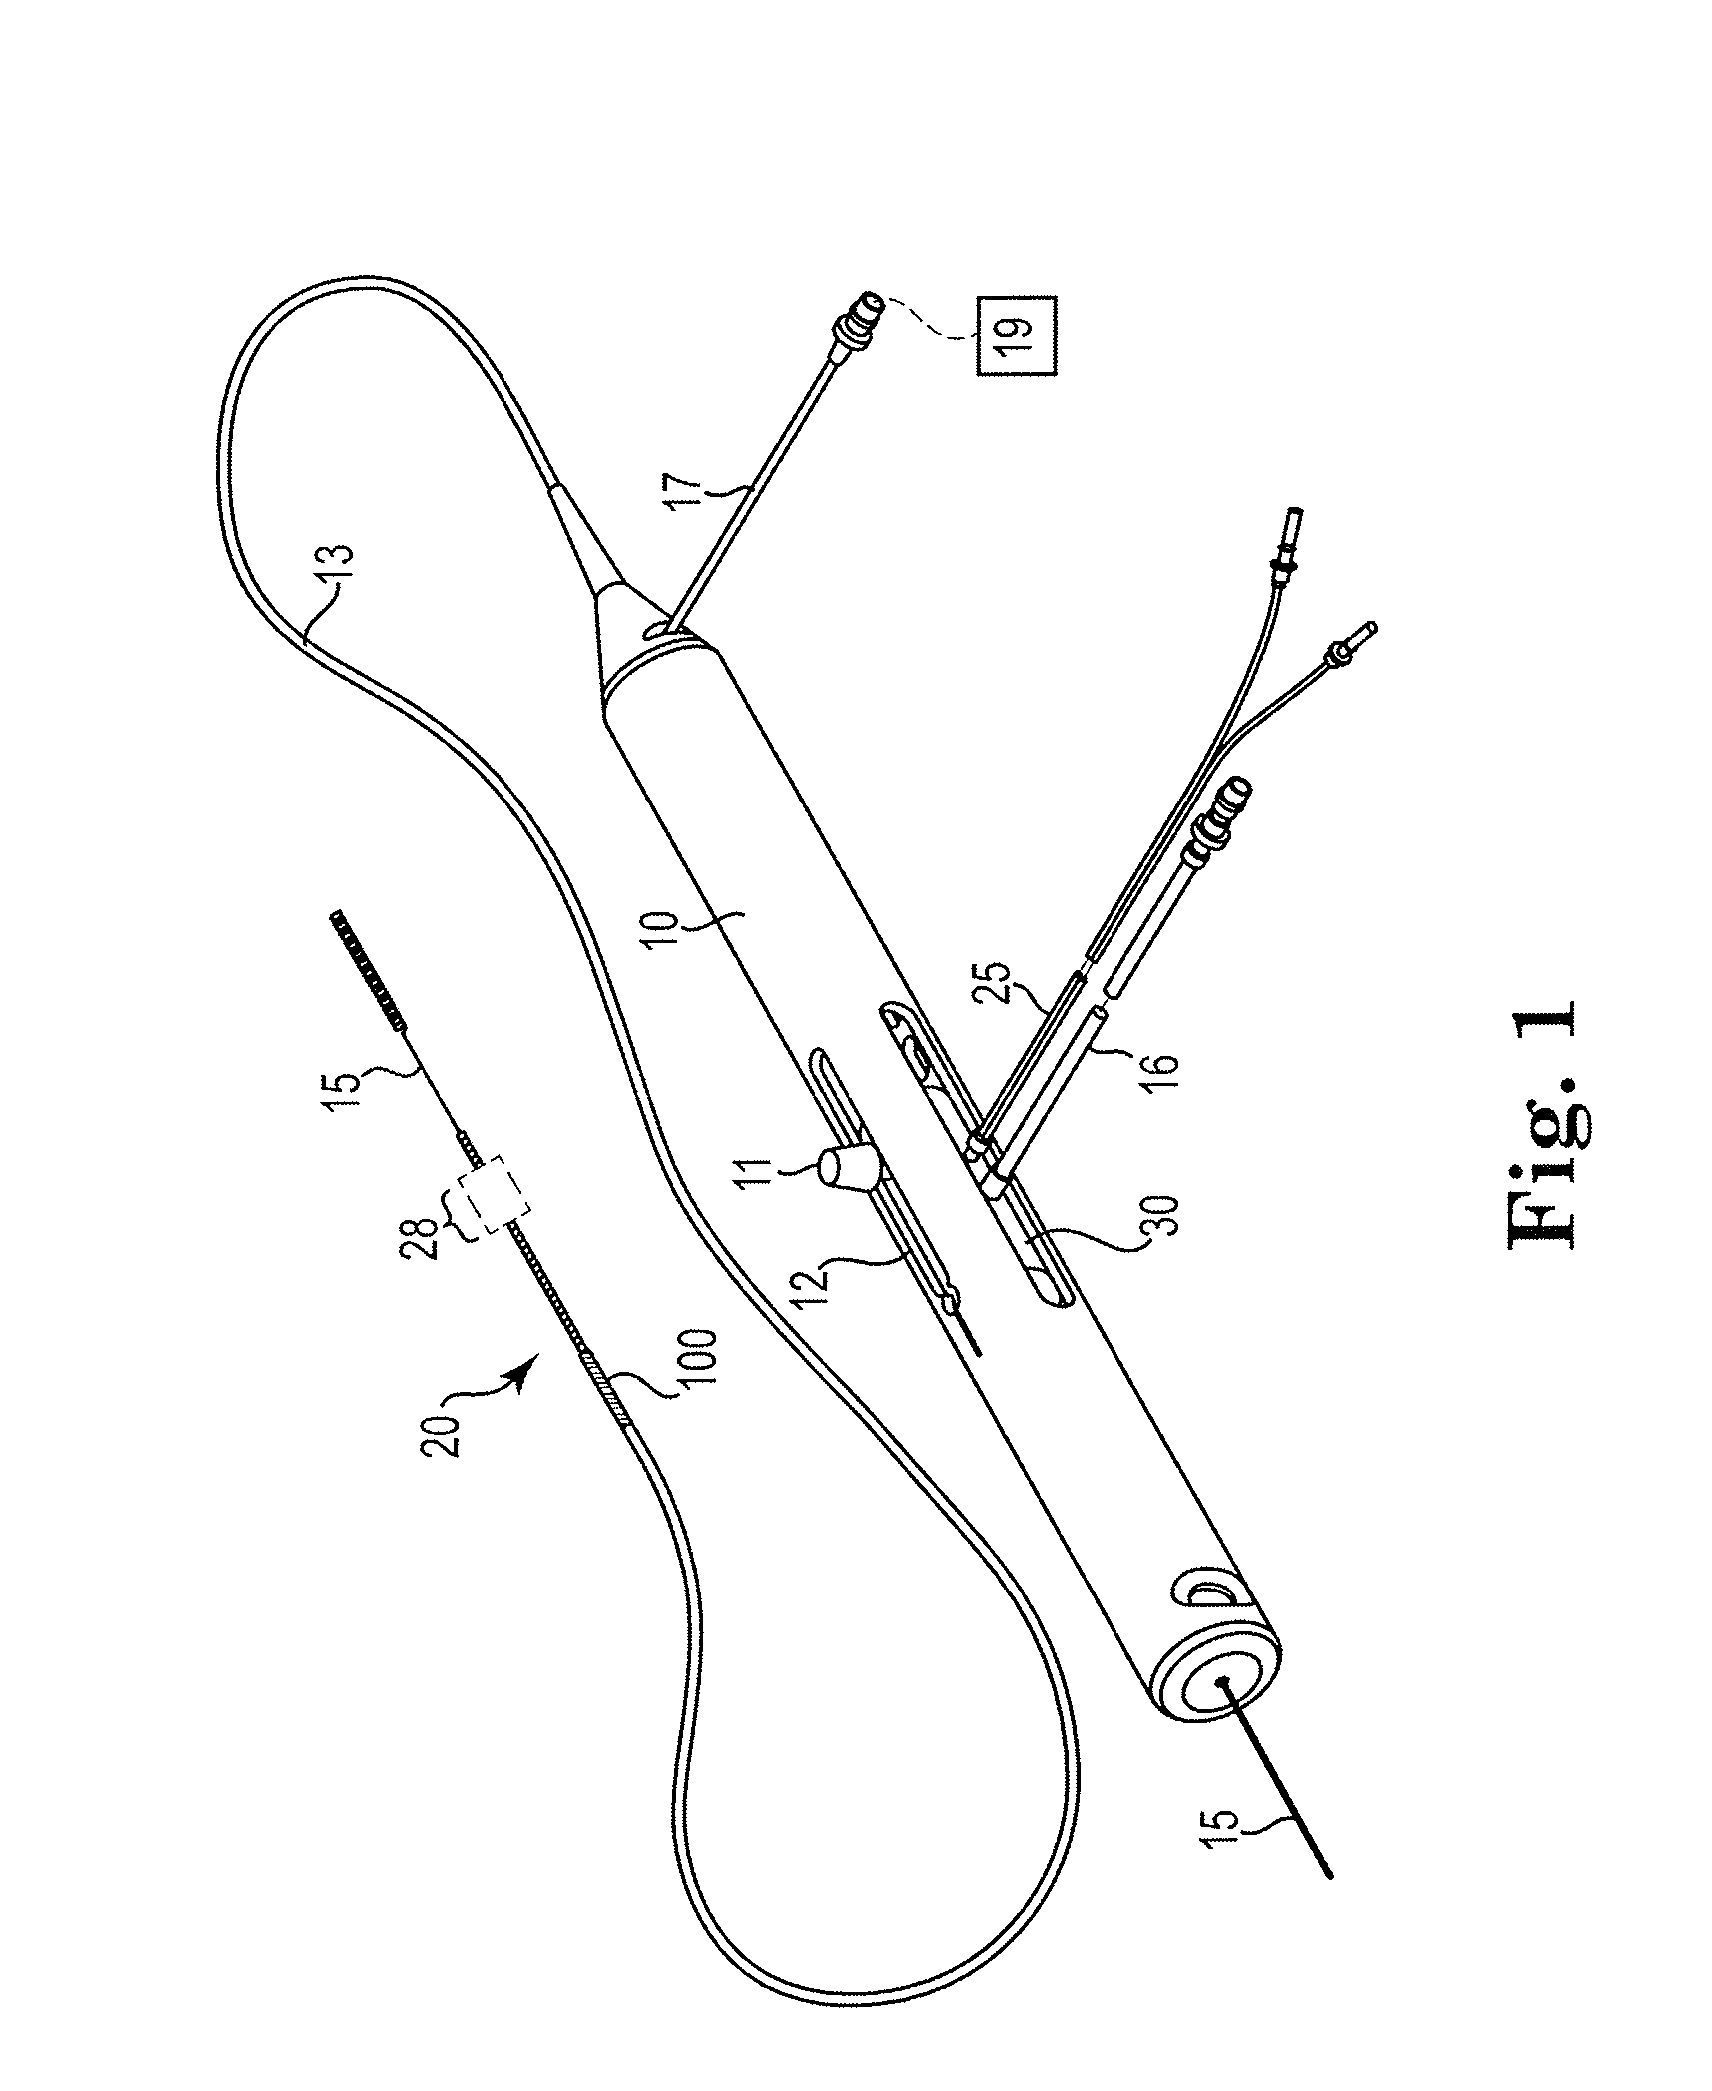 Devices, systems and methods for performing atherectomy and subsequent balloon angioplasty without exchanging devices